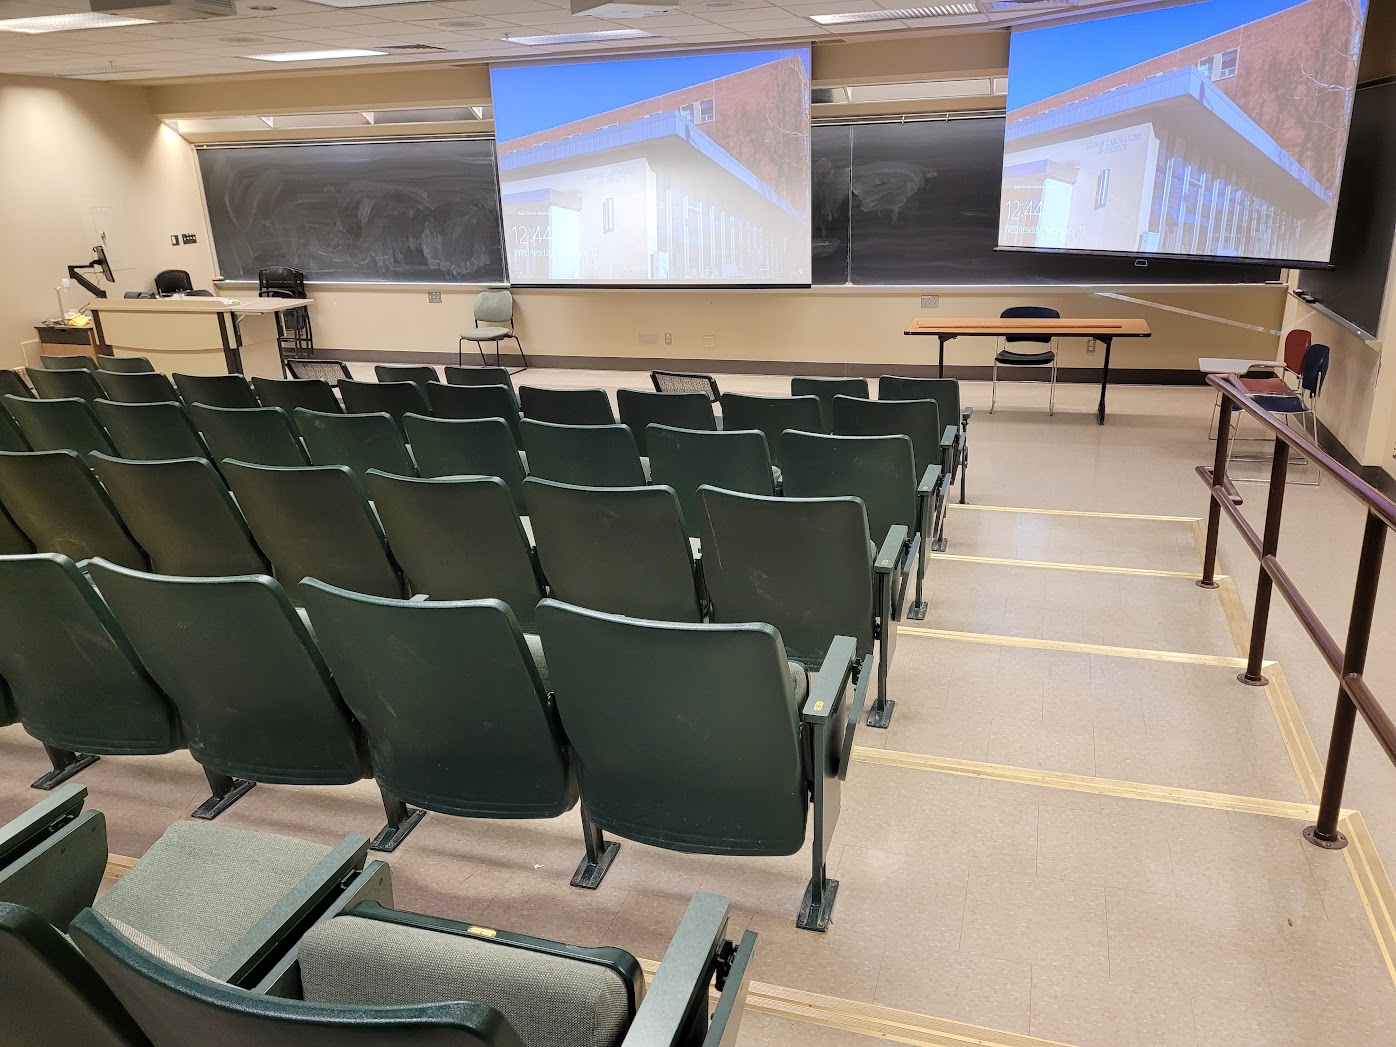 A view of the classroom with Theater Auditorium Seating, chalkboard, and instructor table in front.